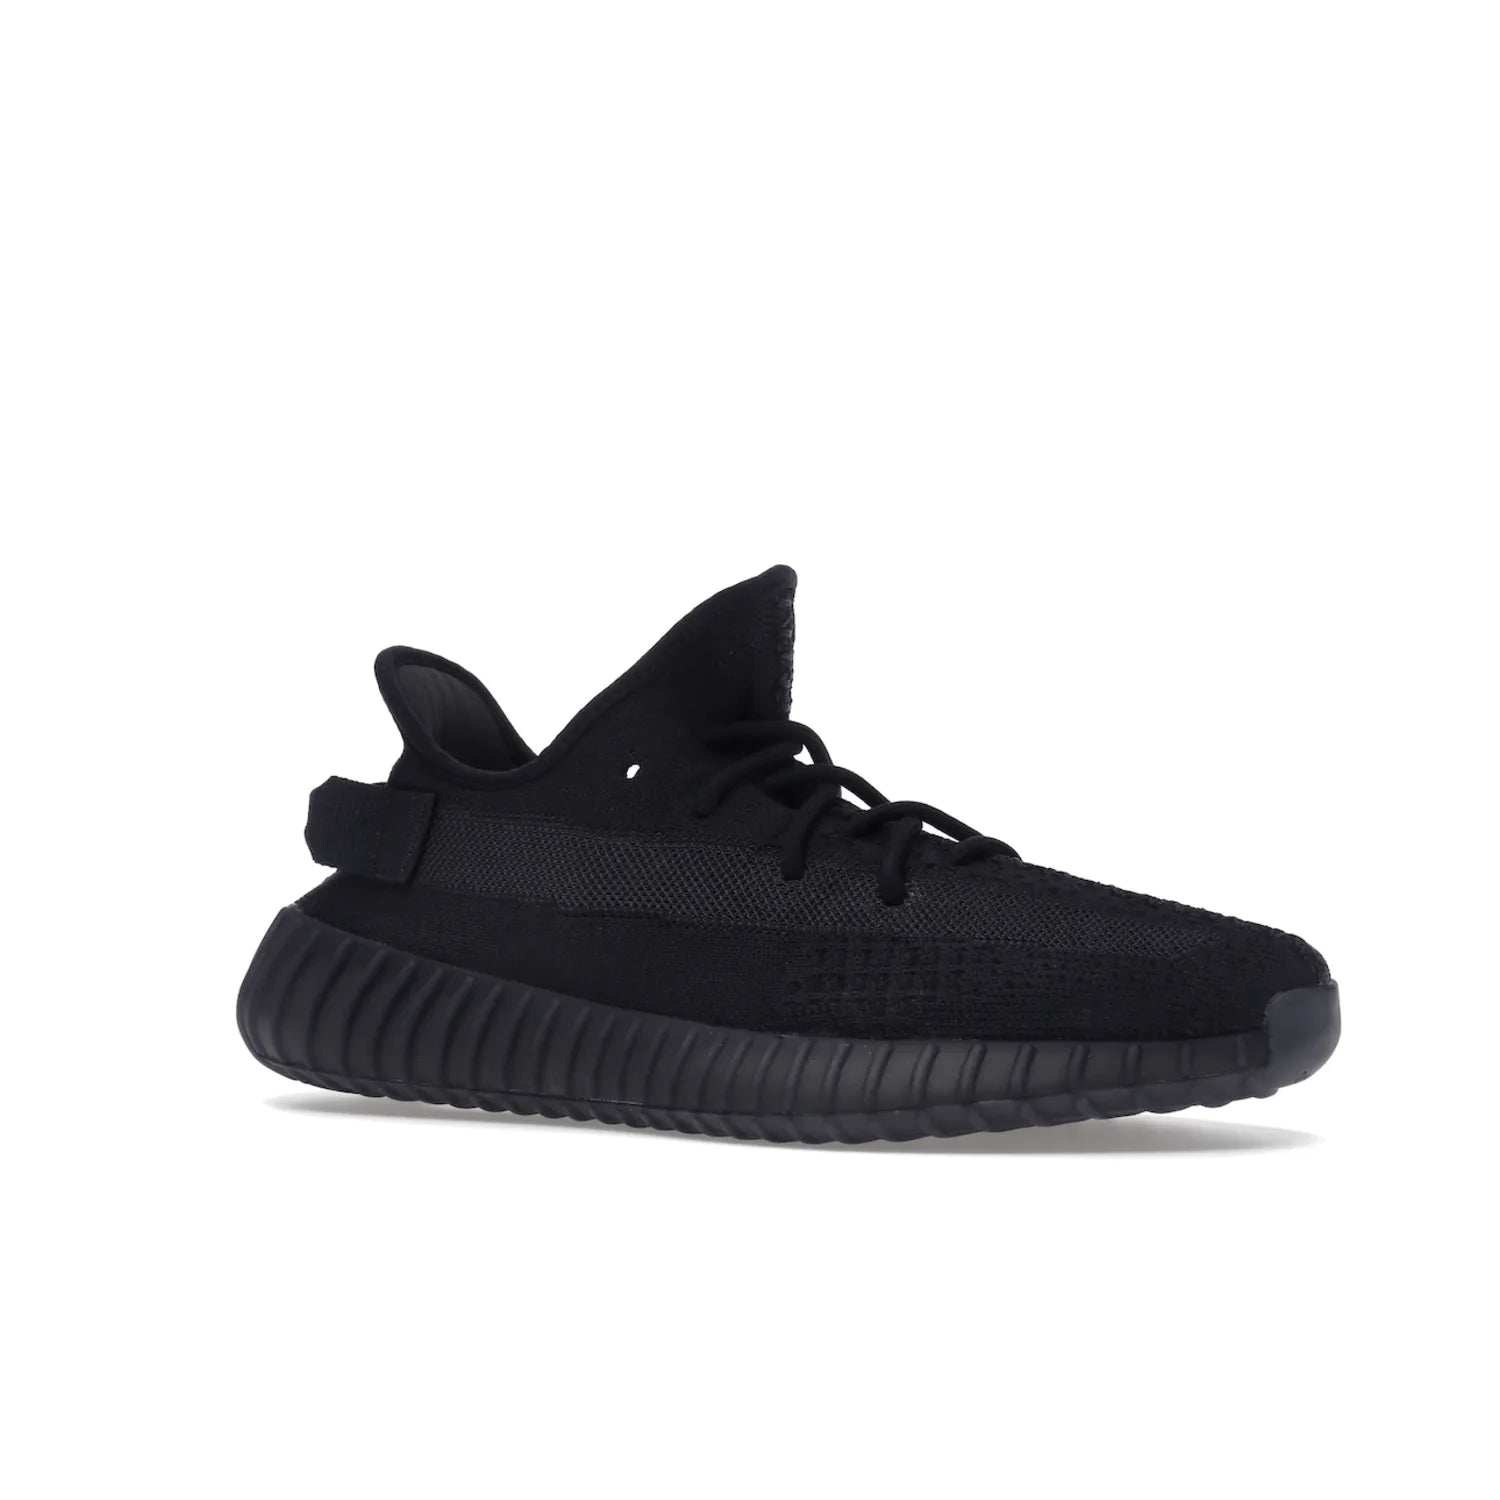 adidas Yeezy Boost 350 V2 Onyx - Image 4 - Only at www.BallersClubKickz.com - Adidas Yeezy Boost 350 V2 Onyx Triple Black shoes for comfort and style. Arriving Spring 2022.